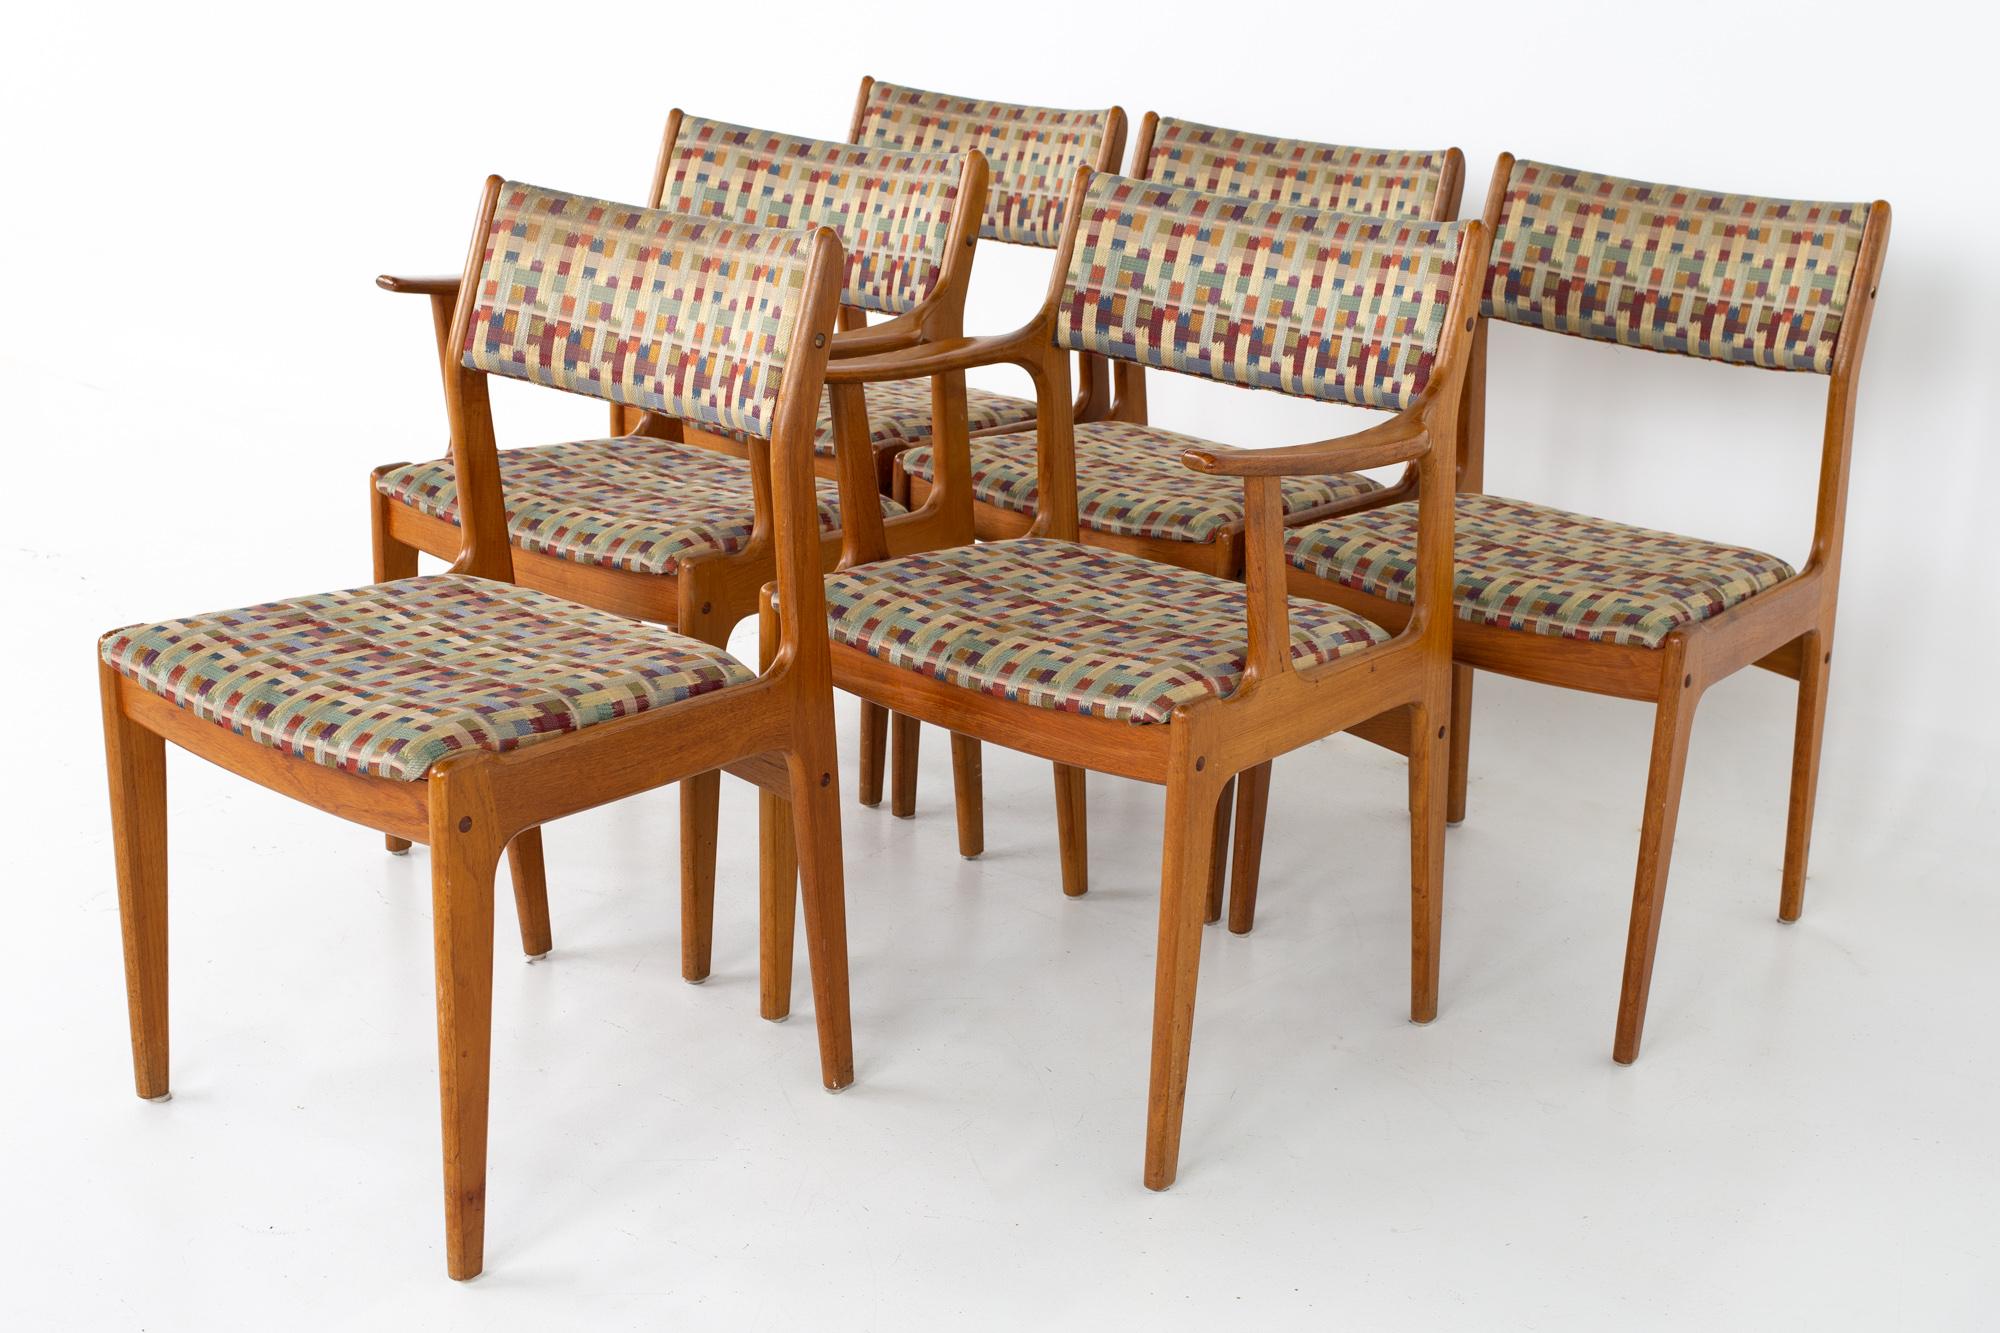 Mid Century teak dining chairs - Set of 6
Each chair measures: 19 wide x 20 deep x 33 high, with a seat height of 17.5 inches

All pieces of furniture can be had in what we call restored vintage condition. That means the piece is restored upon